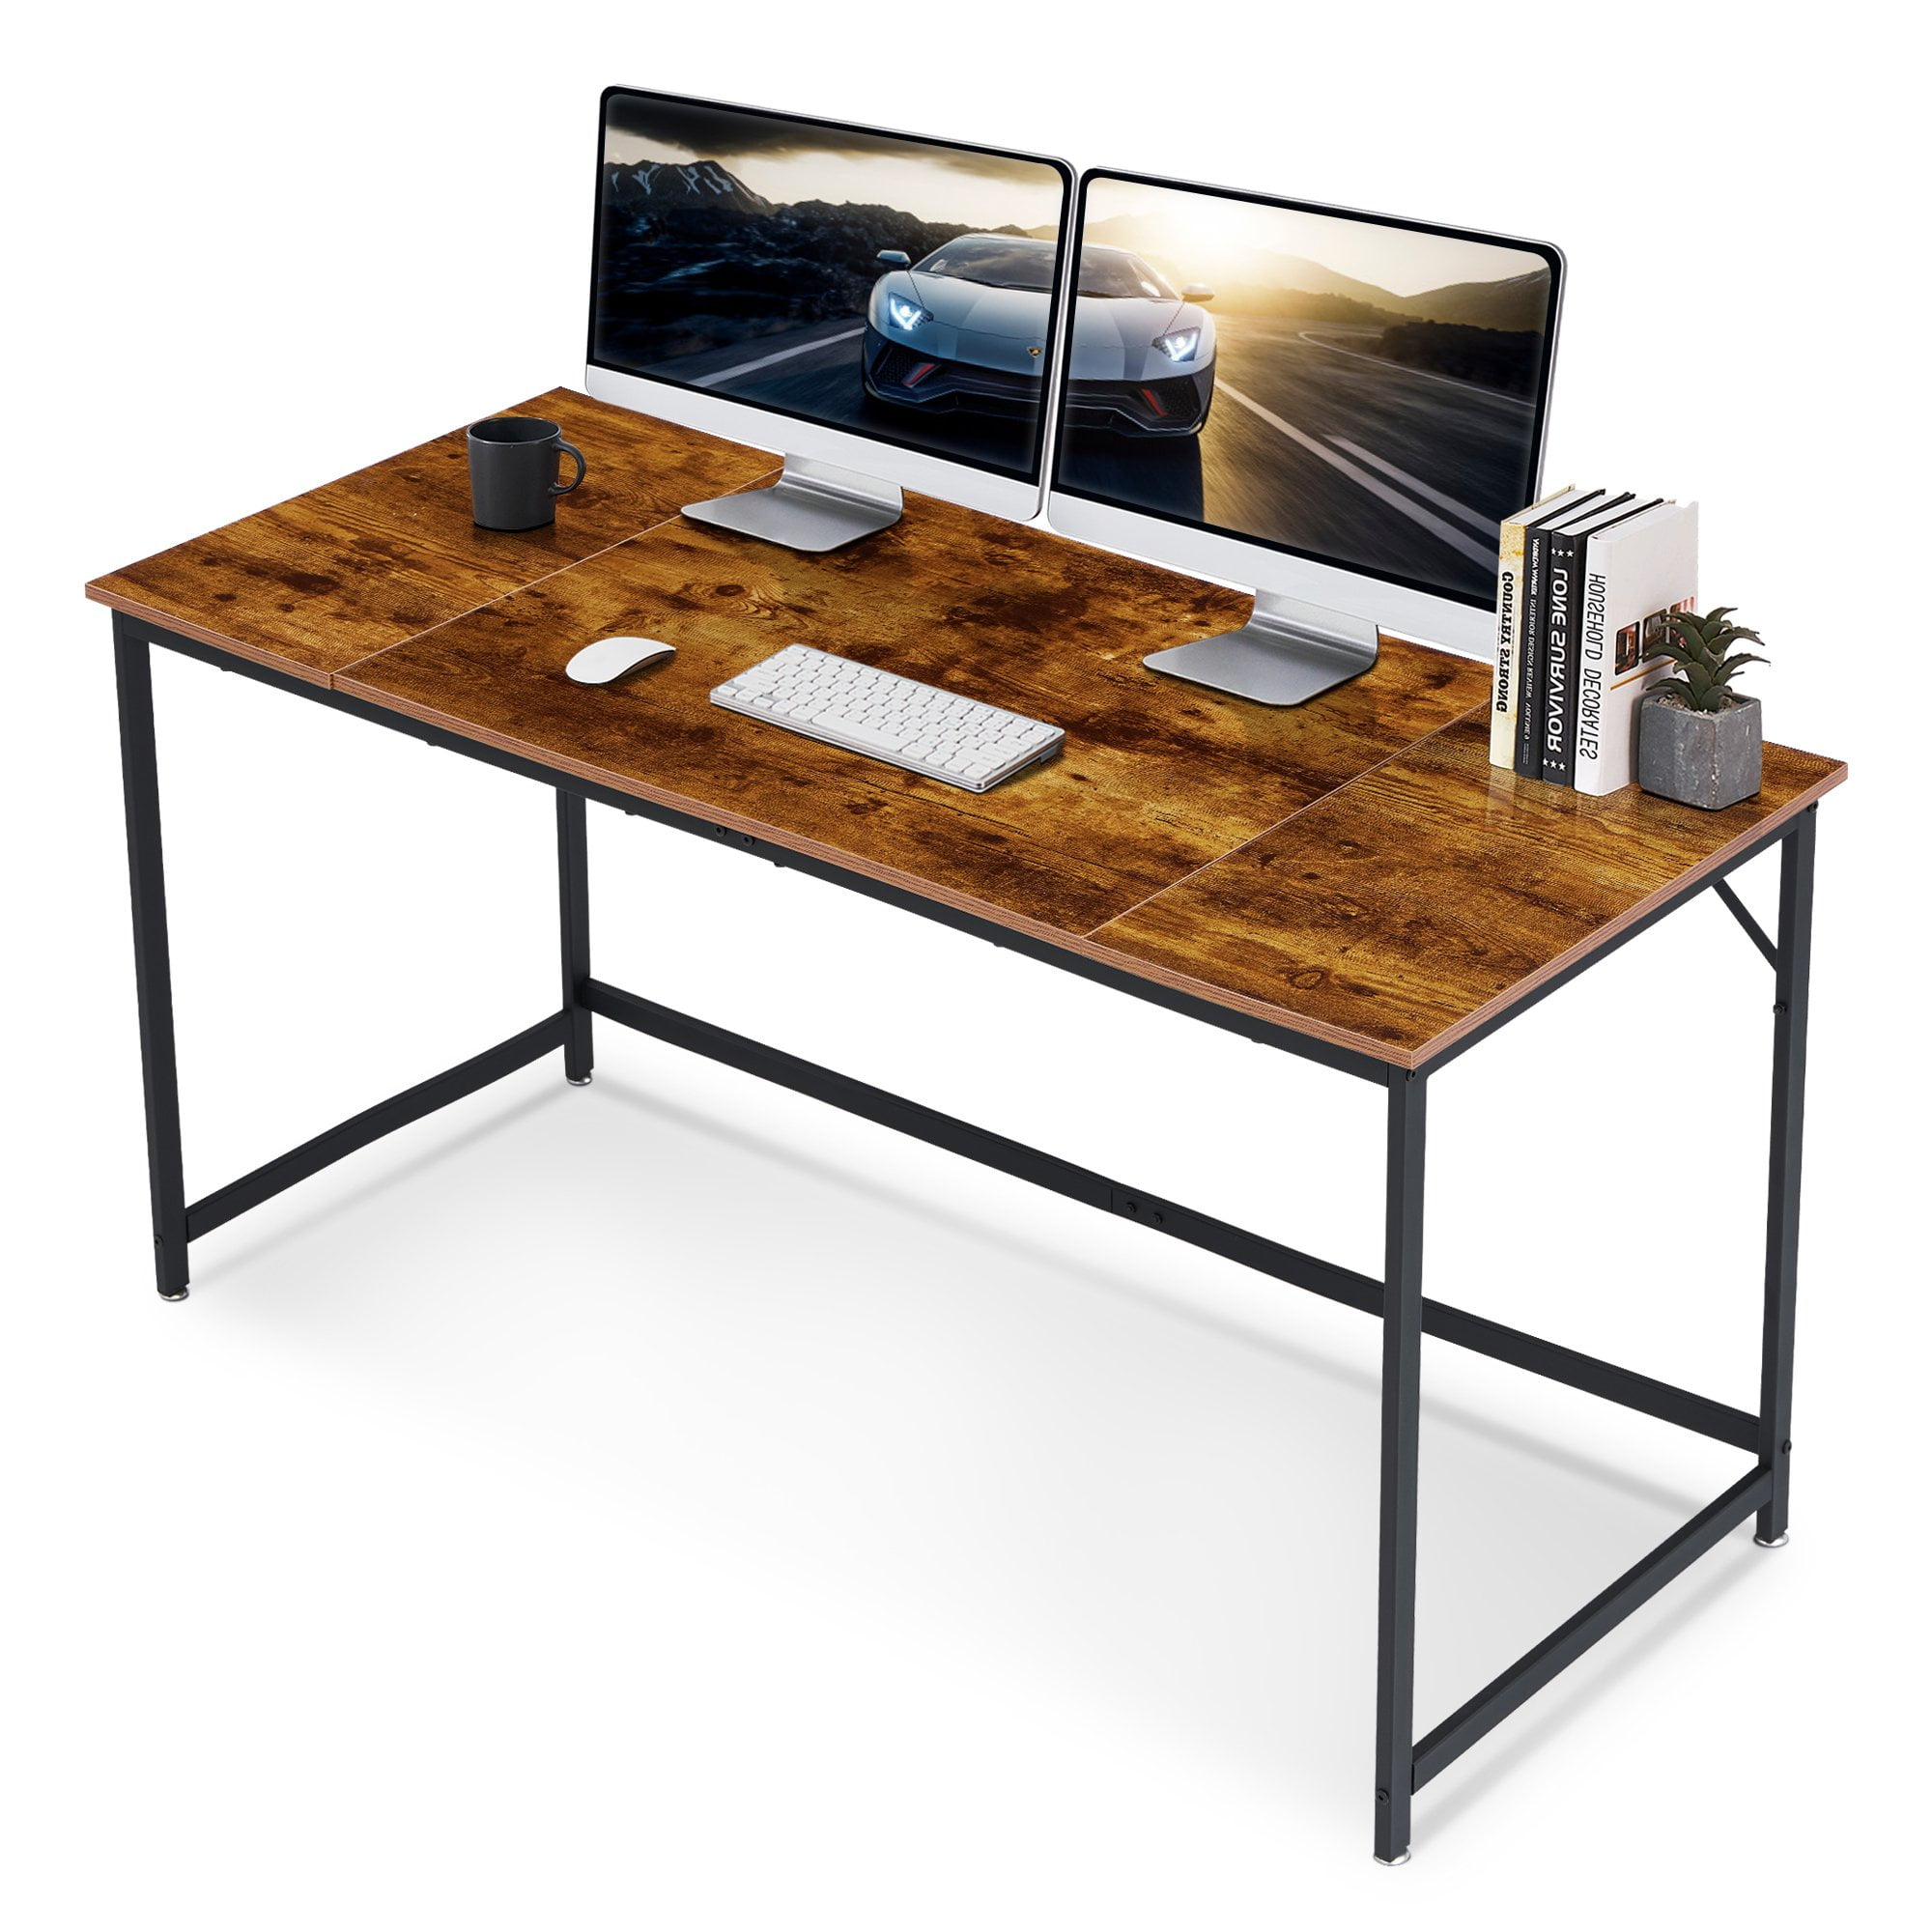 ivinta Home Office Desk, 40-inch Simple Computer Desk, Writing